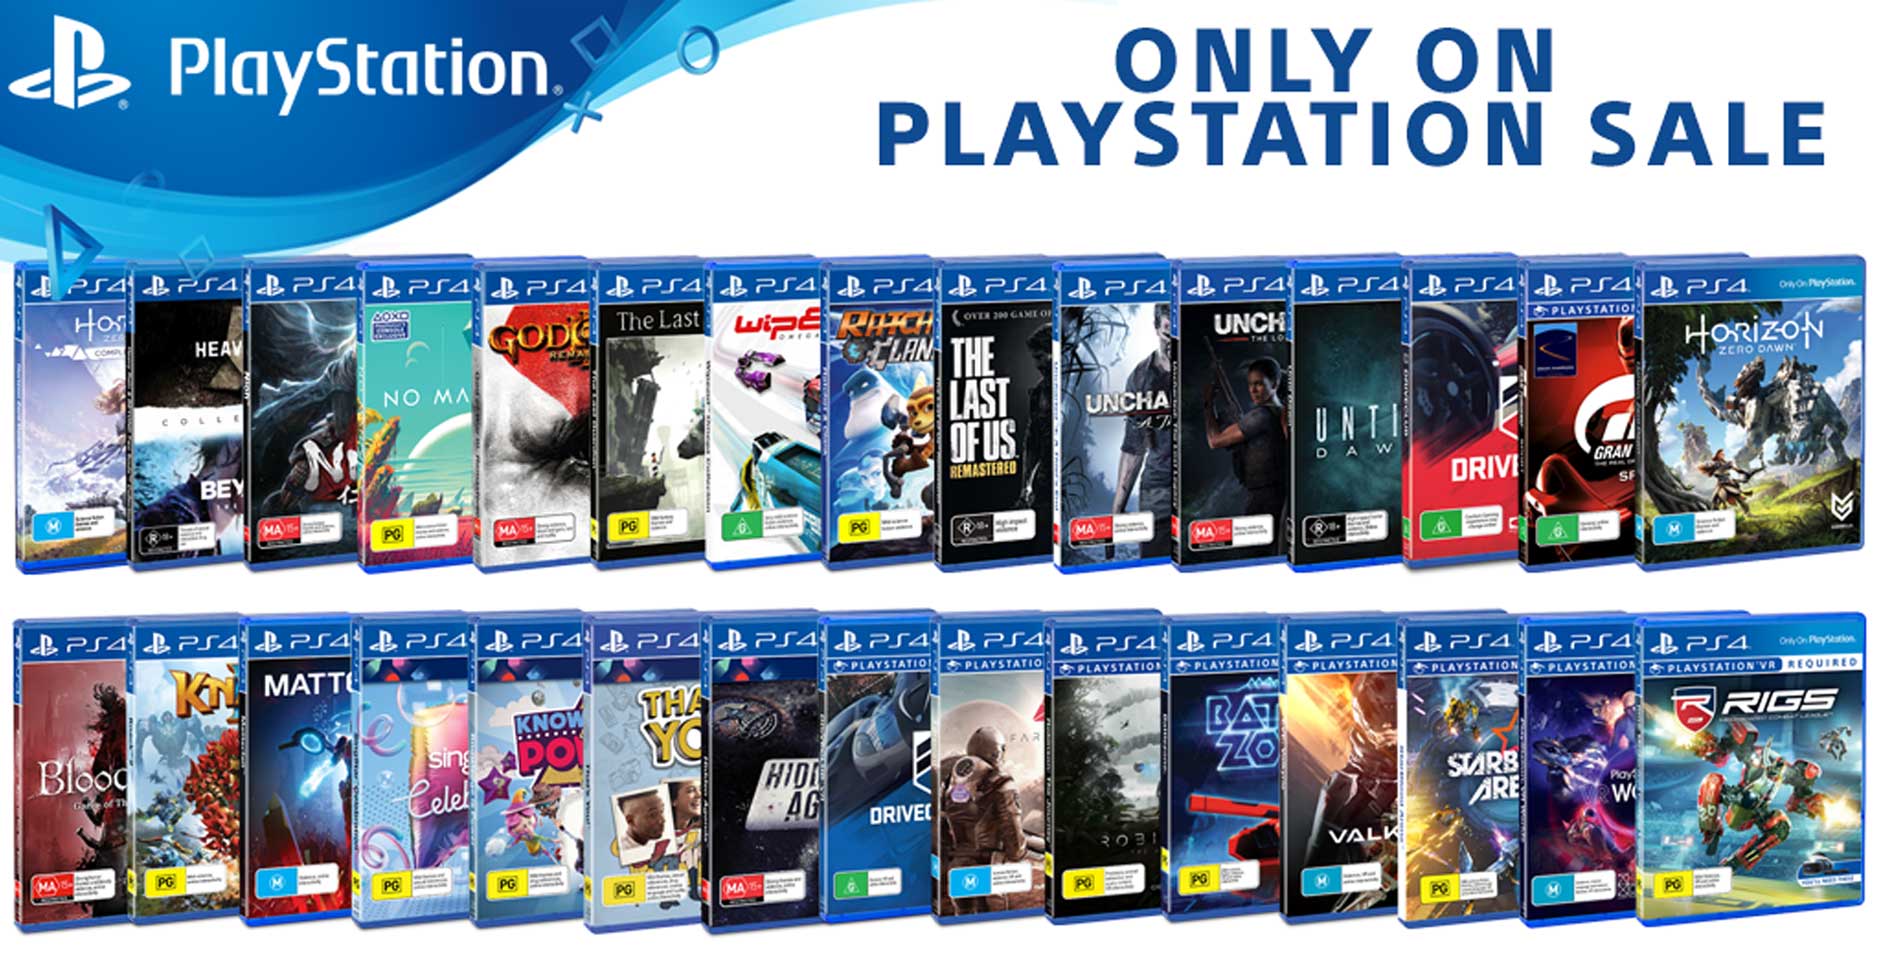 Play only games. Only PLAYSTATION. Only on PLAYSTATION. Надпись only on PLAYSTATION. Витрина для Sony PLAYSTATION.